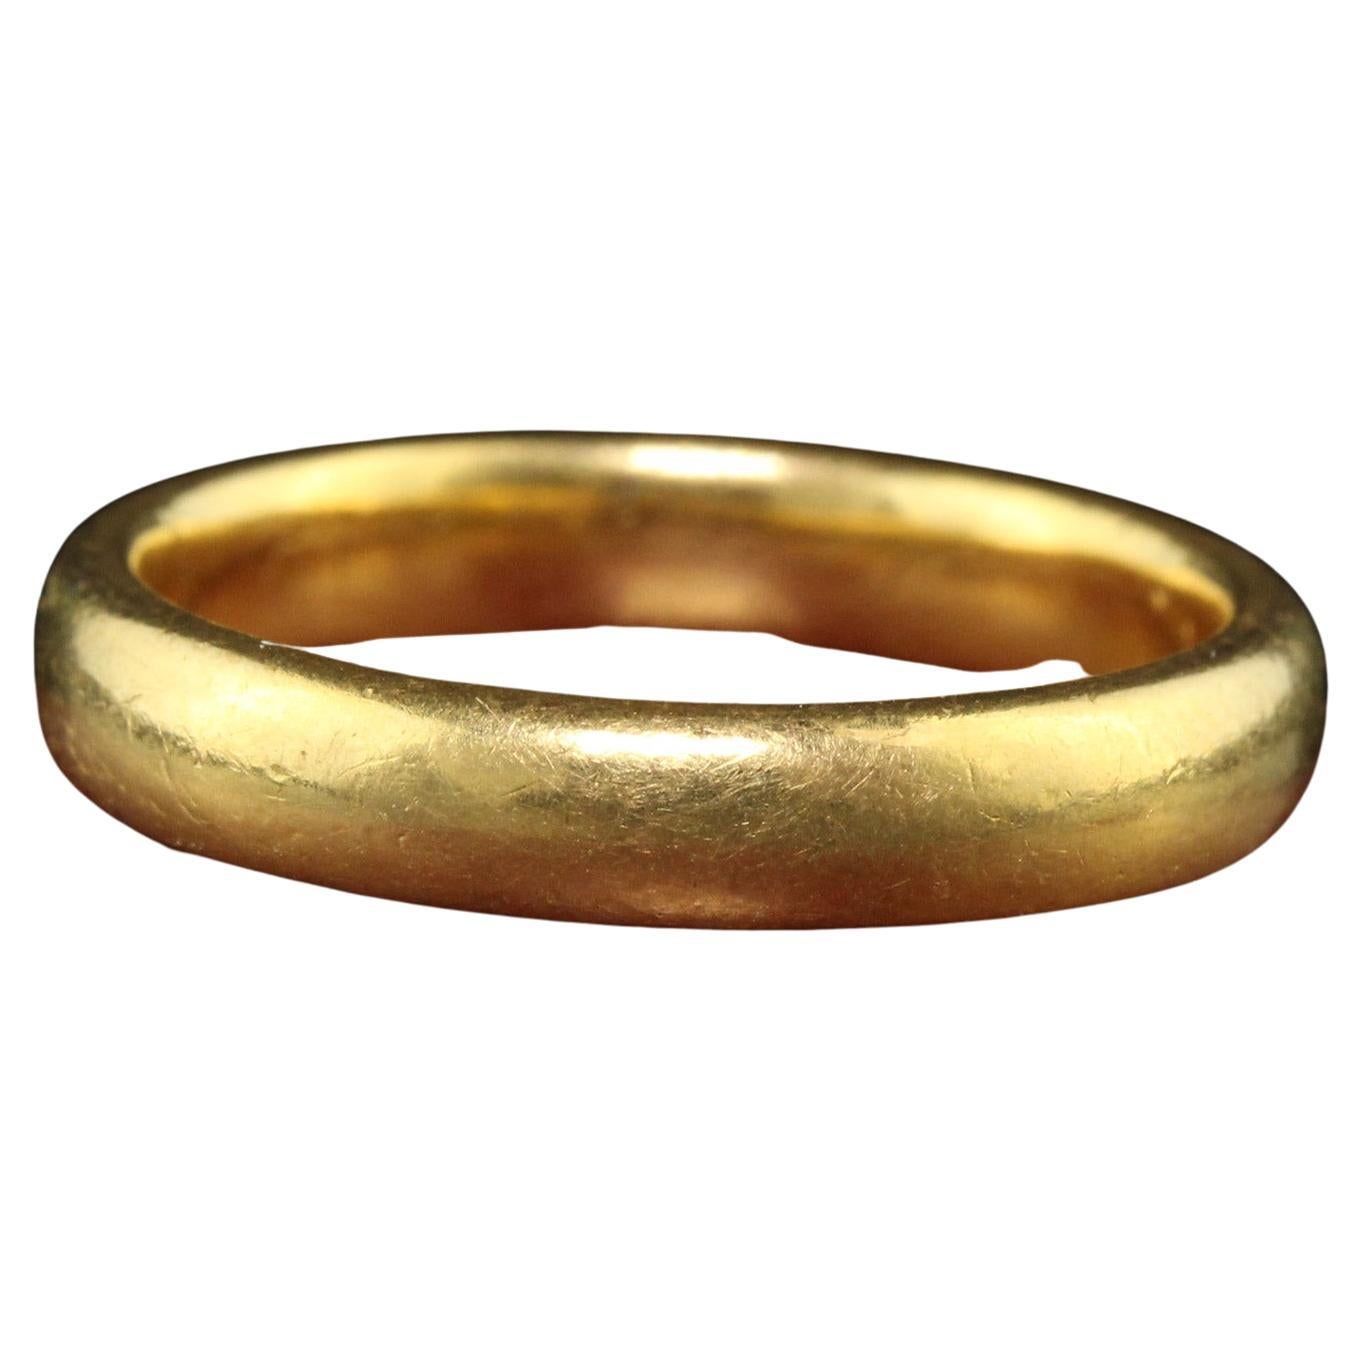 Antique Art Deco Tiffany and Co 22K Yellow Gold Wedding Band - Size 5 1/4 For Sale